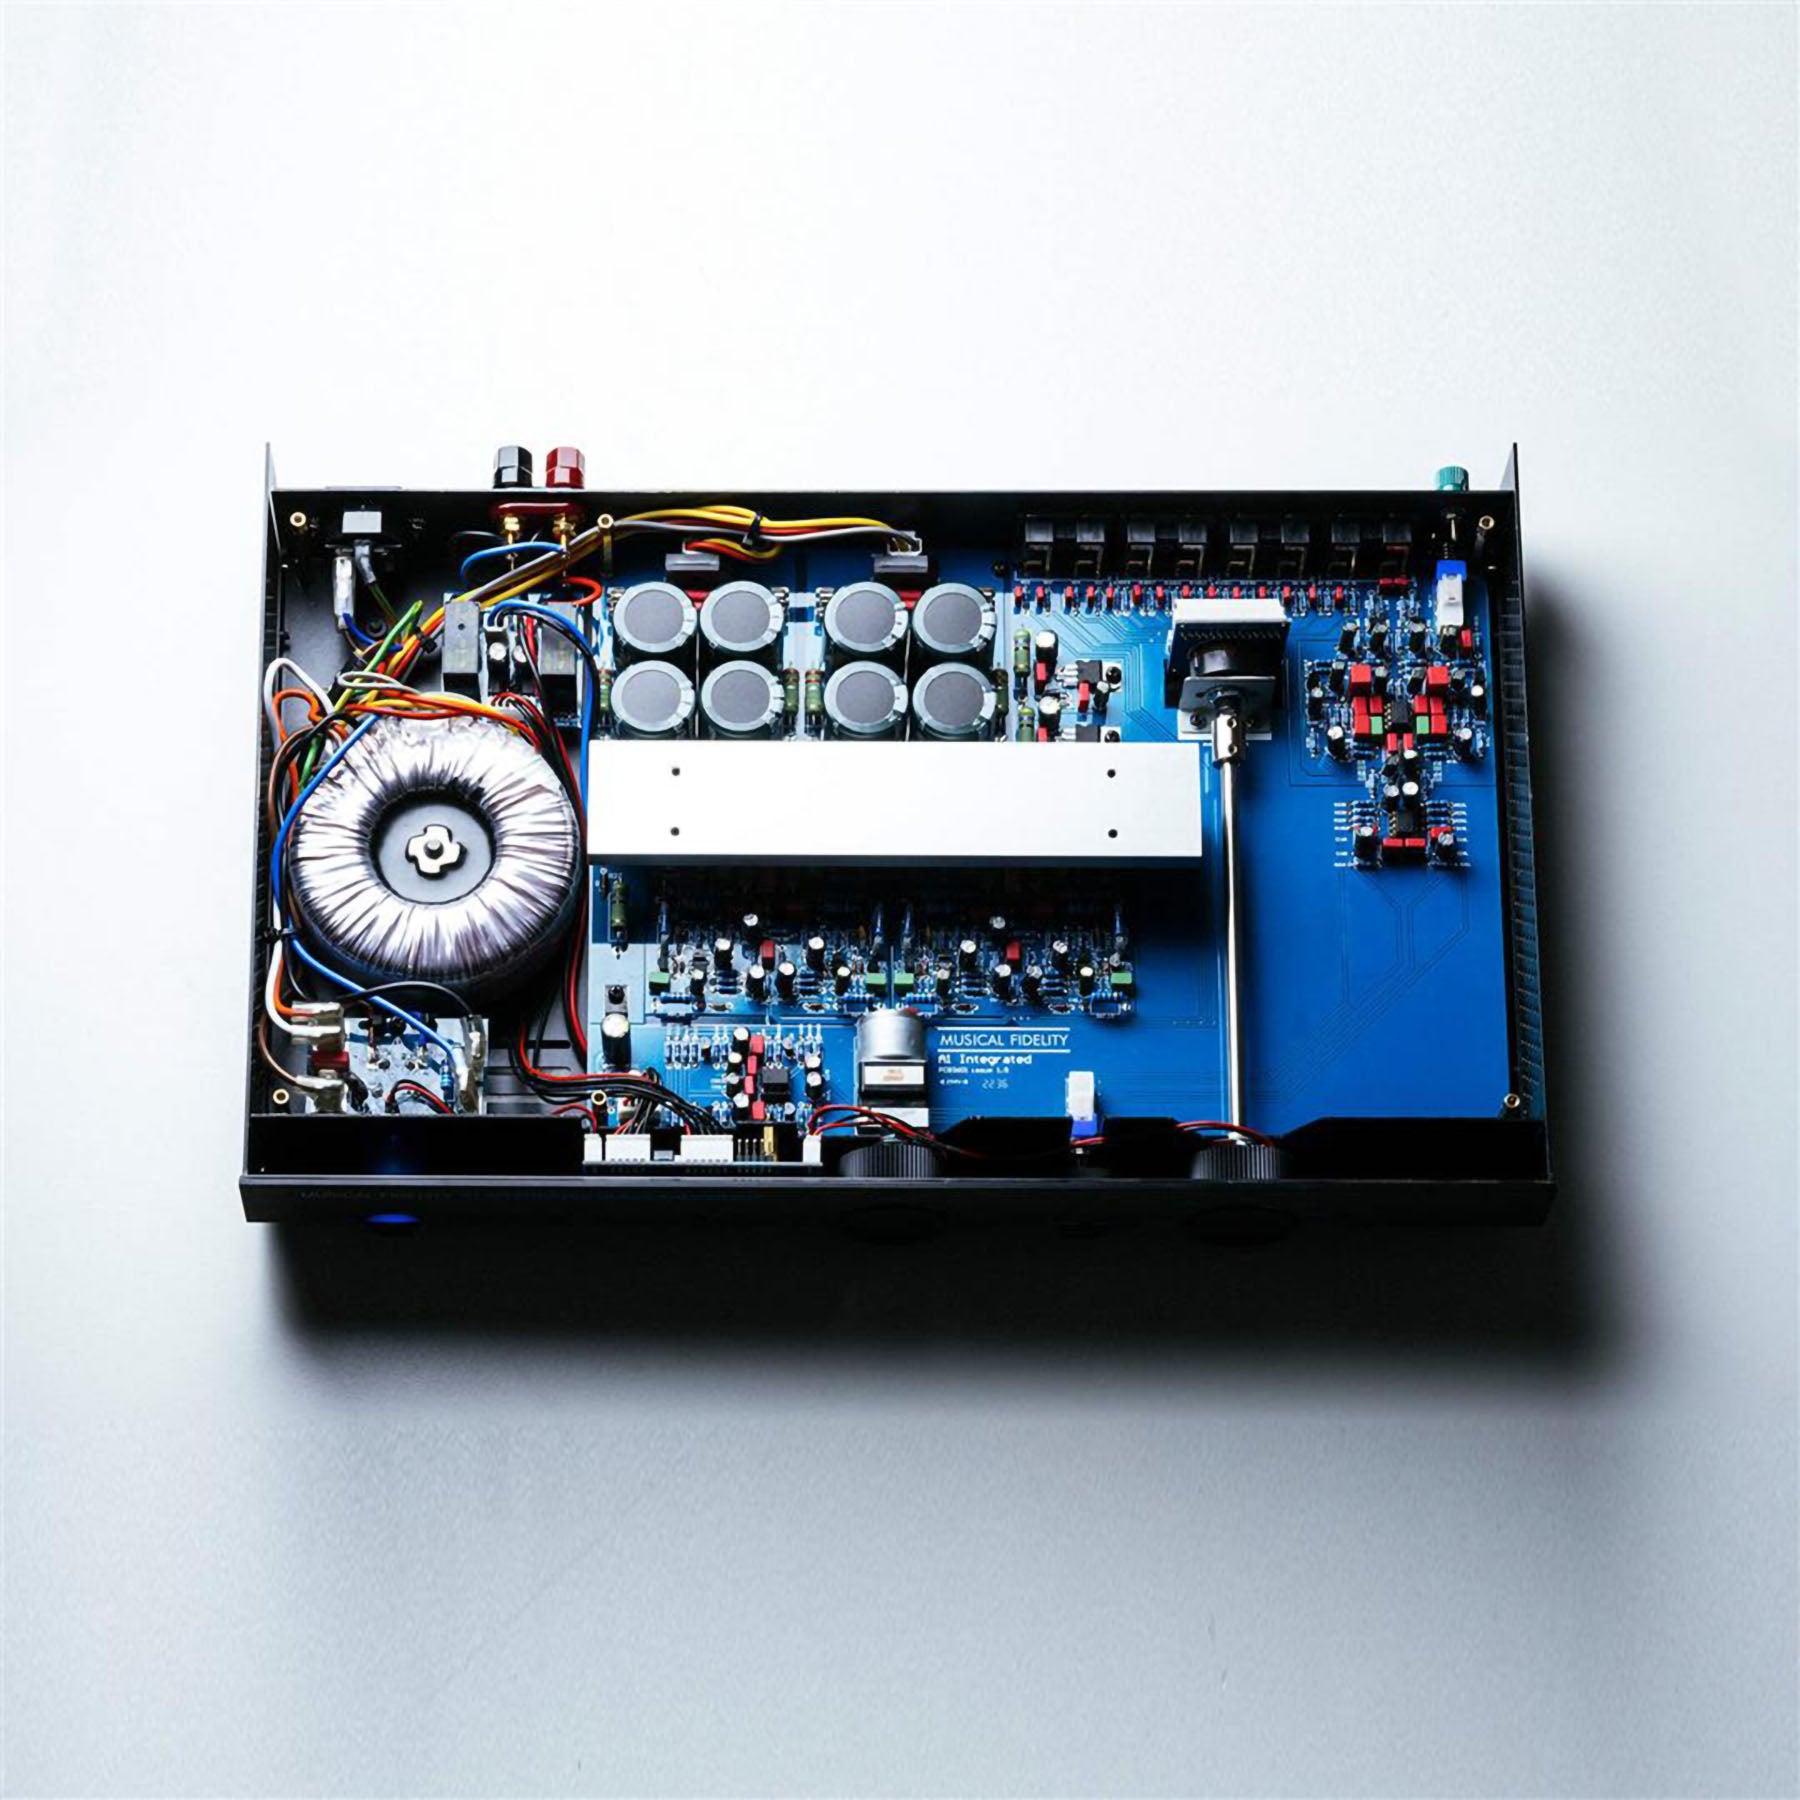 Musical Fidelity A1 Class A Integrated Amplifier